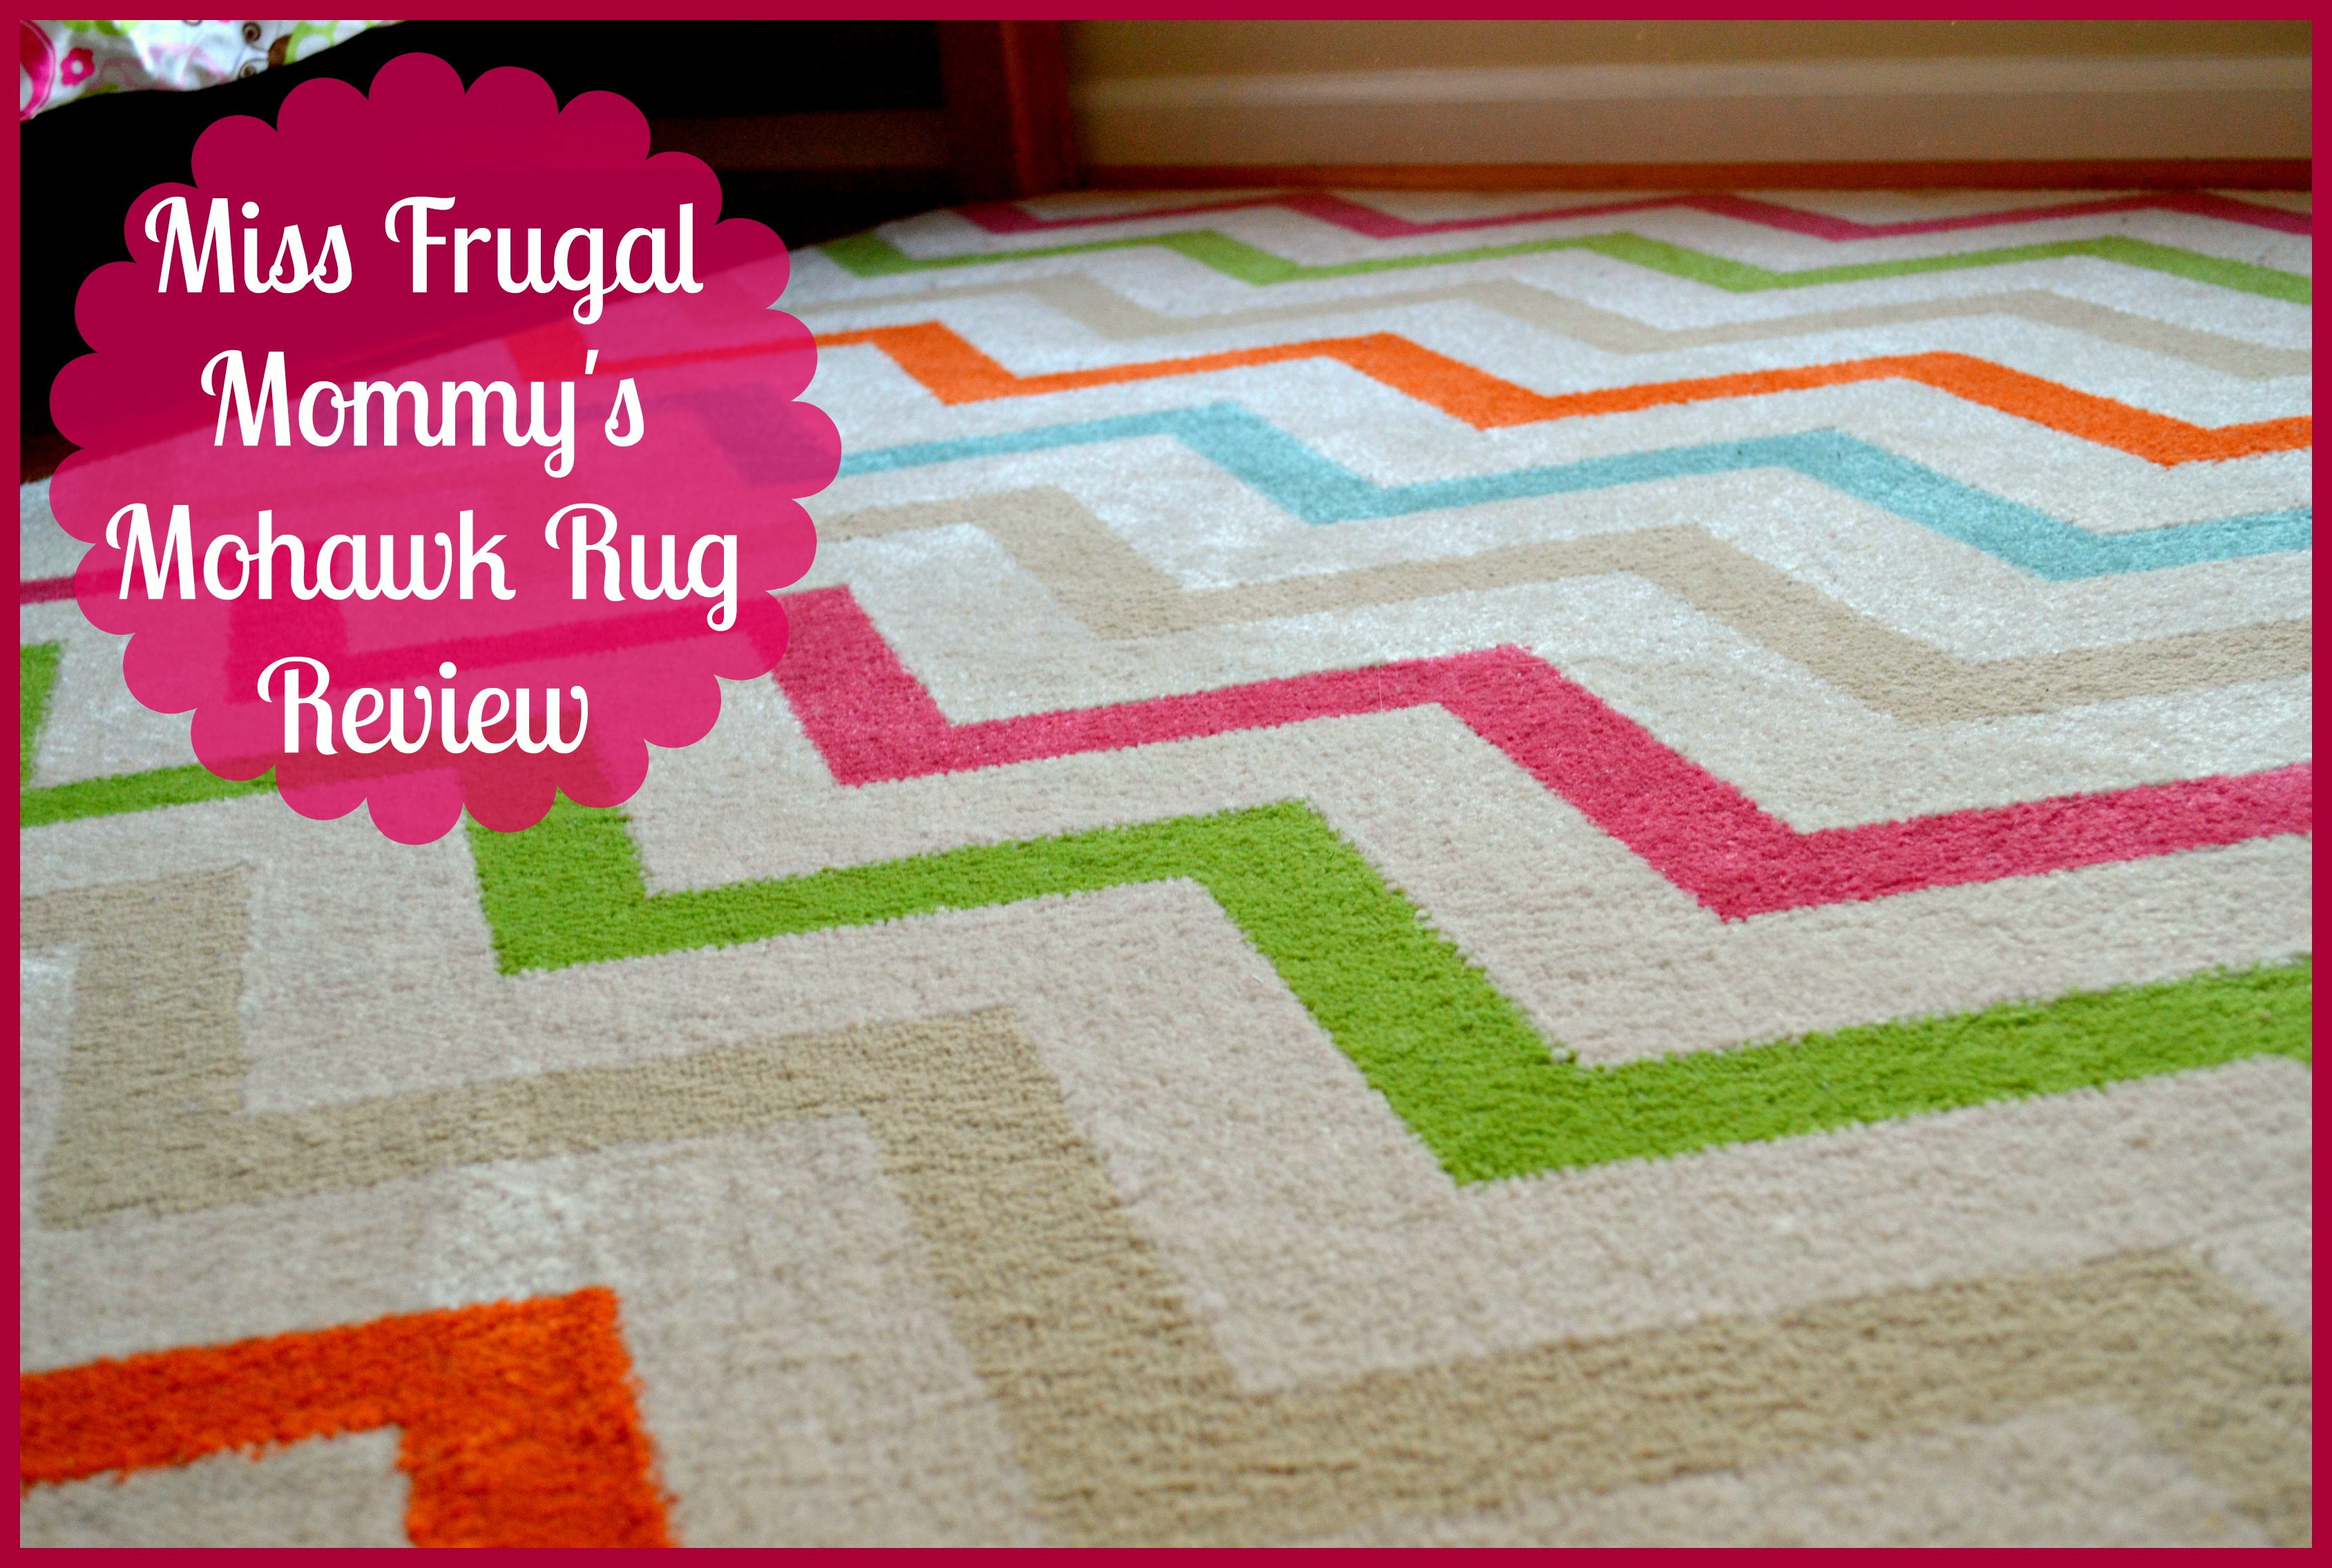 Brighten Up a Room With A New Rug